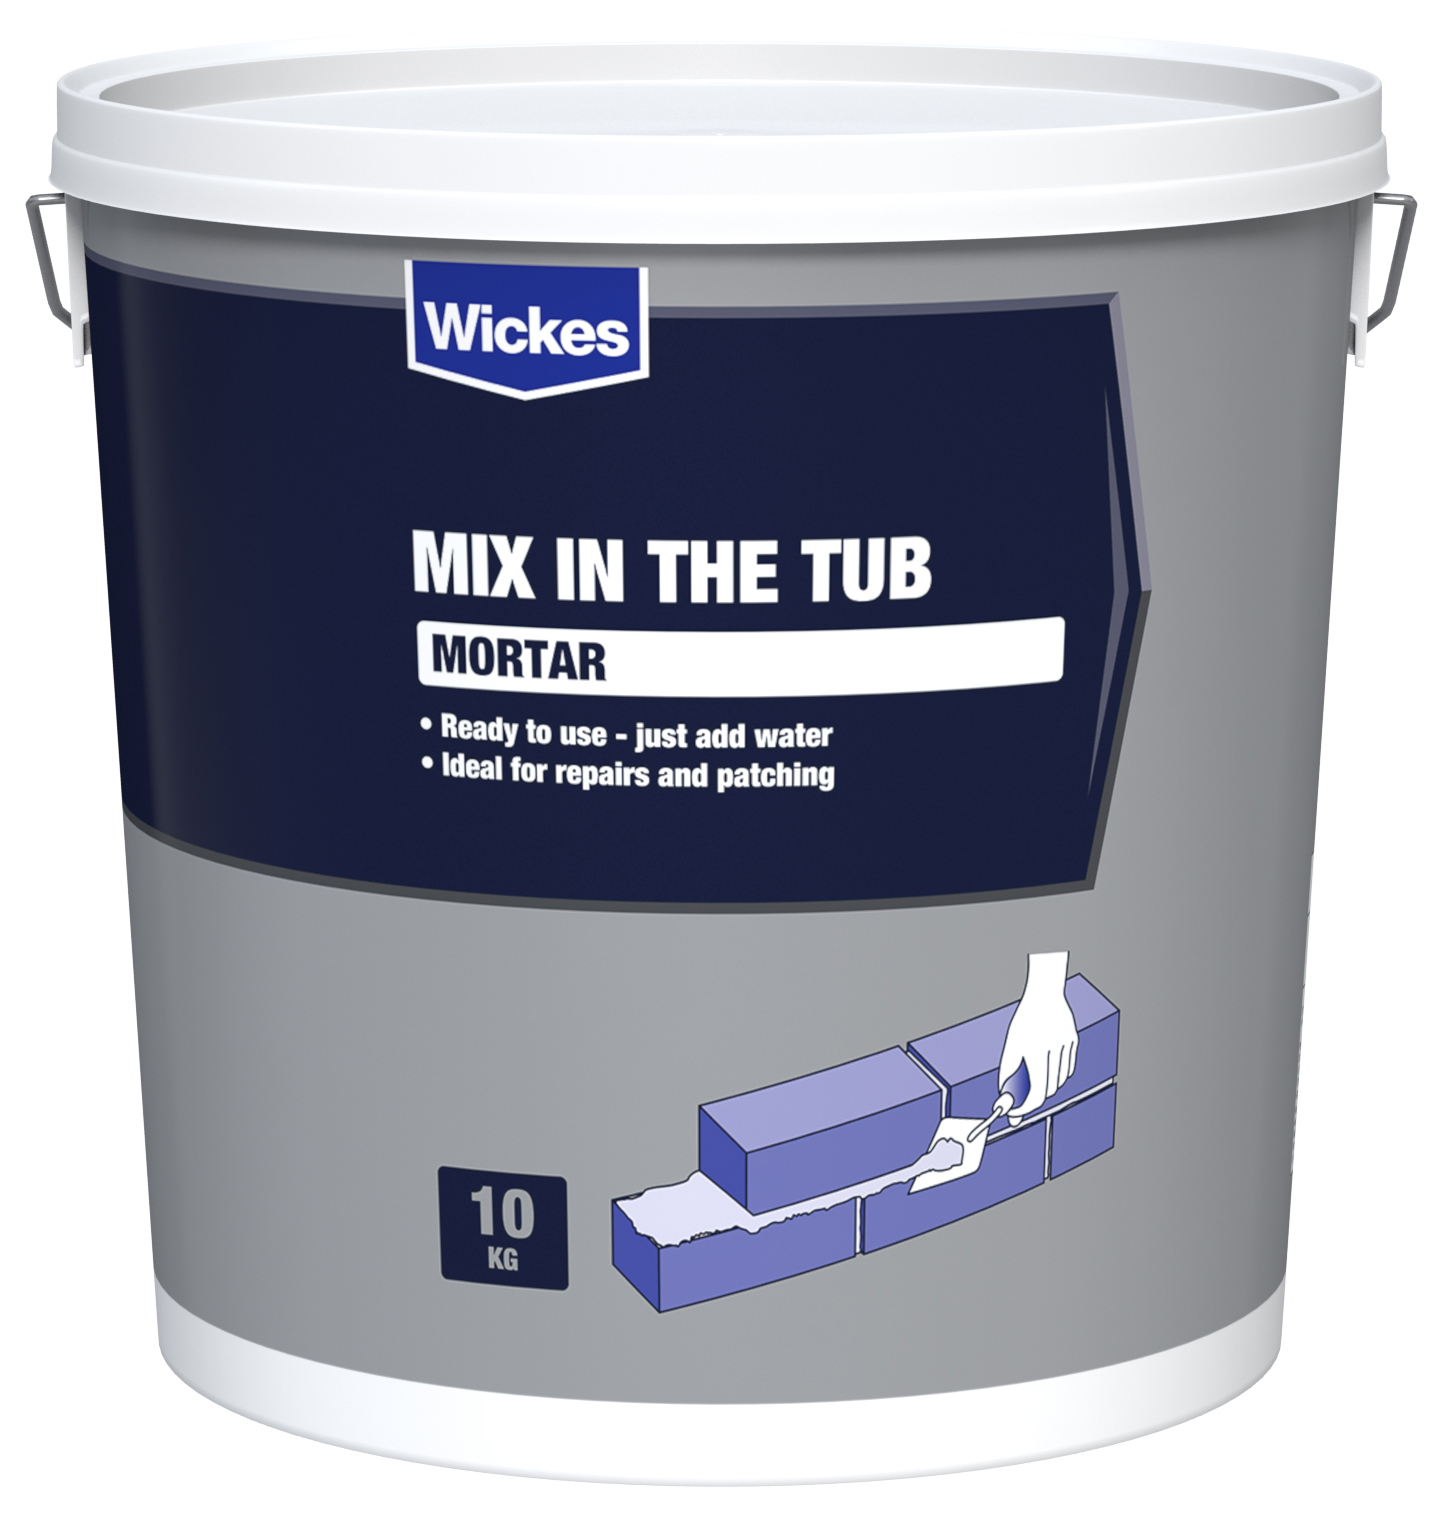 Image of Wickes Mix in the Tub Mortar - 10kg